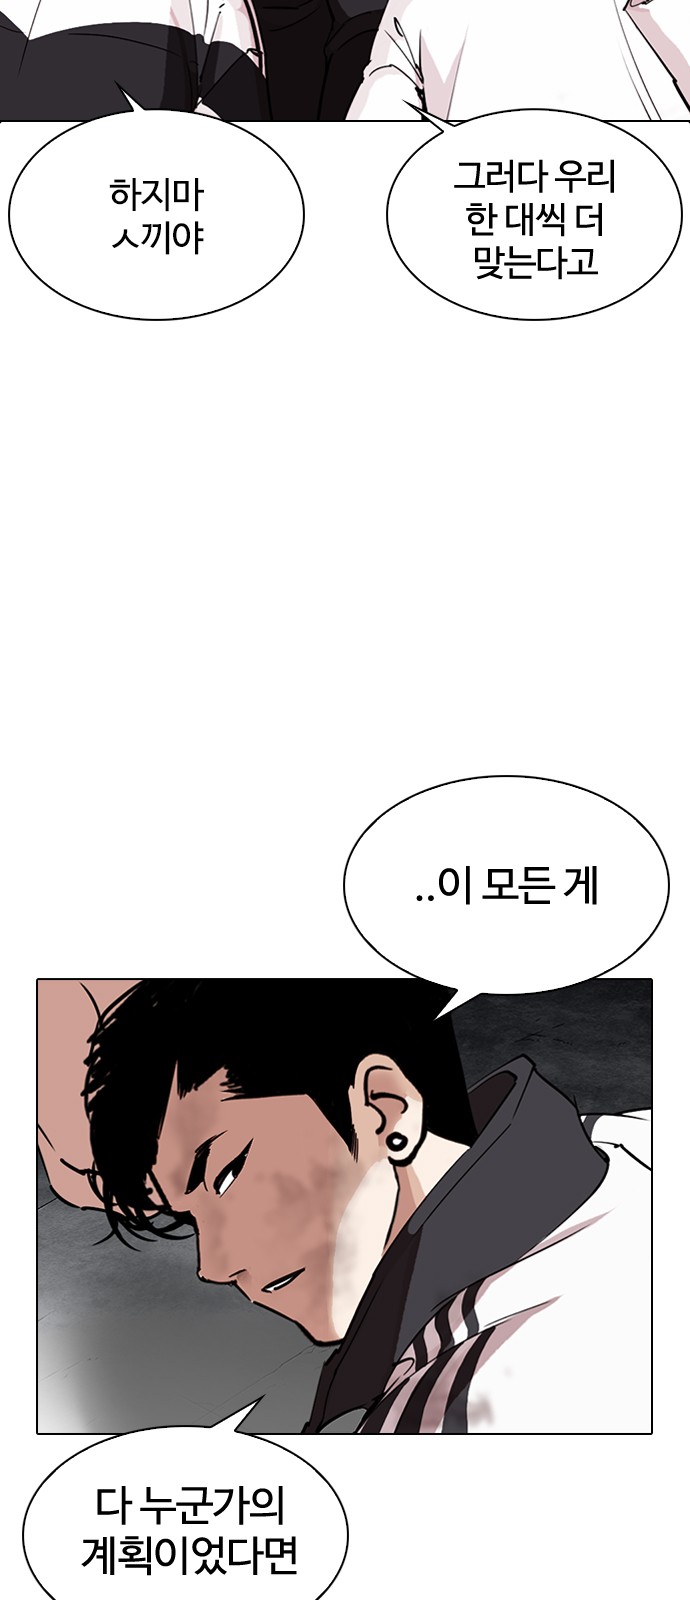 Lookism - Chapter 275 - Page 5